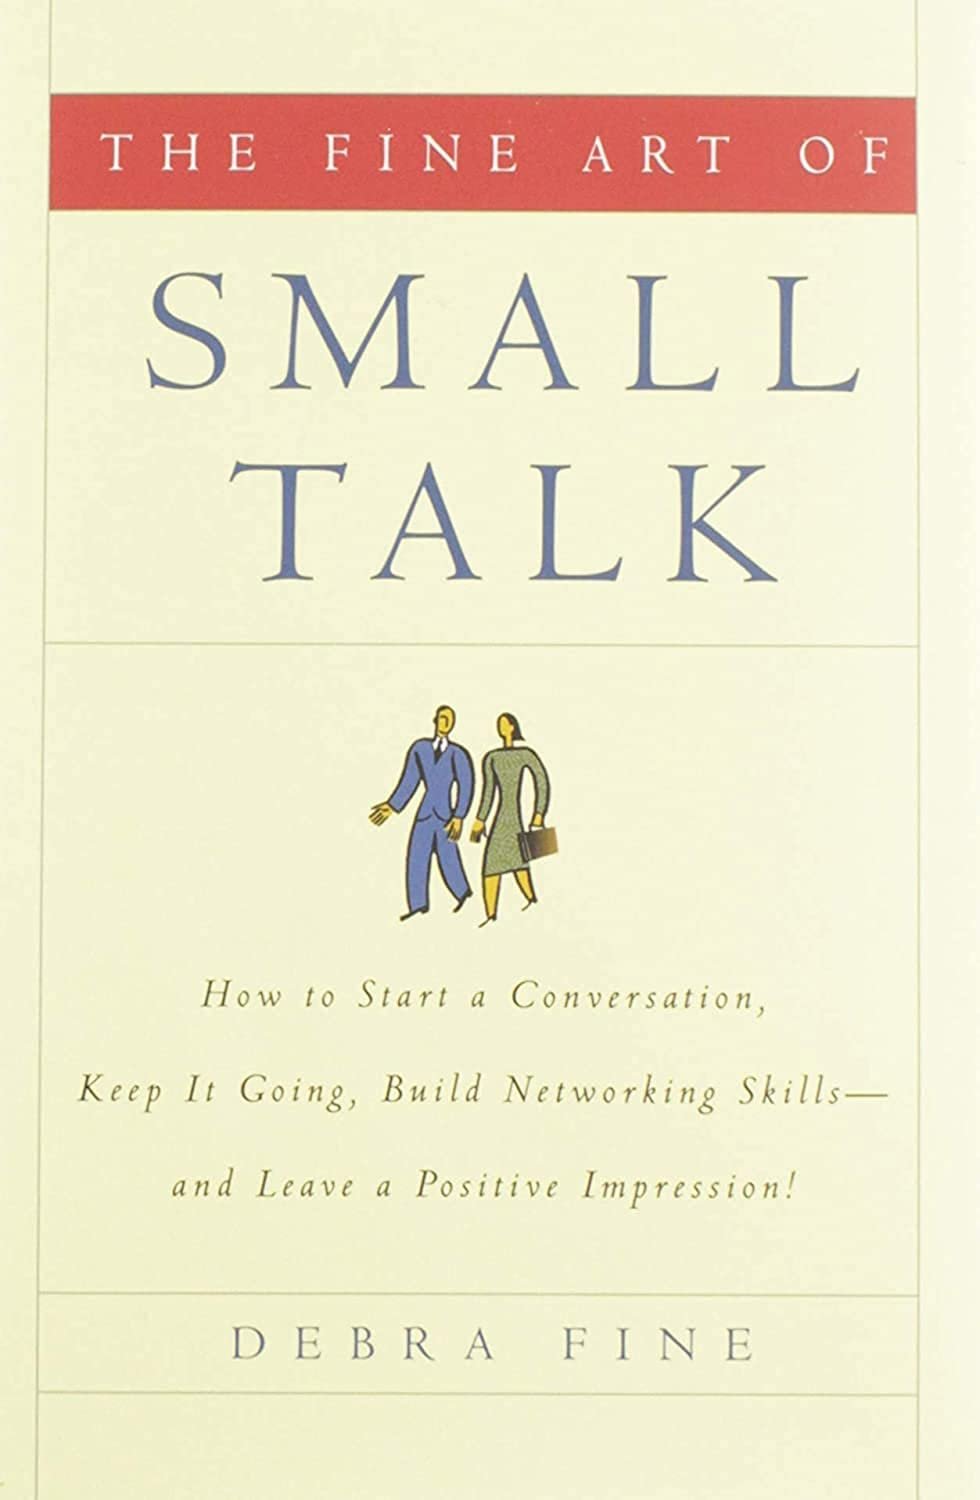 Cover of the book "The Fine Art of Small Talk: How To Start a Conversation, Keep It Going, Build Networking Skills -- and Leave a Positive Impression!" by Debra Fine, featuring the title in red and blue text, and an illustration of two people walking and talking about conversation techniques.